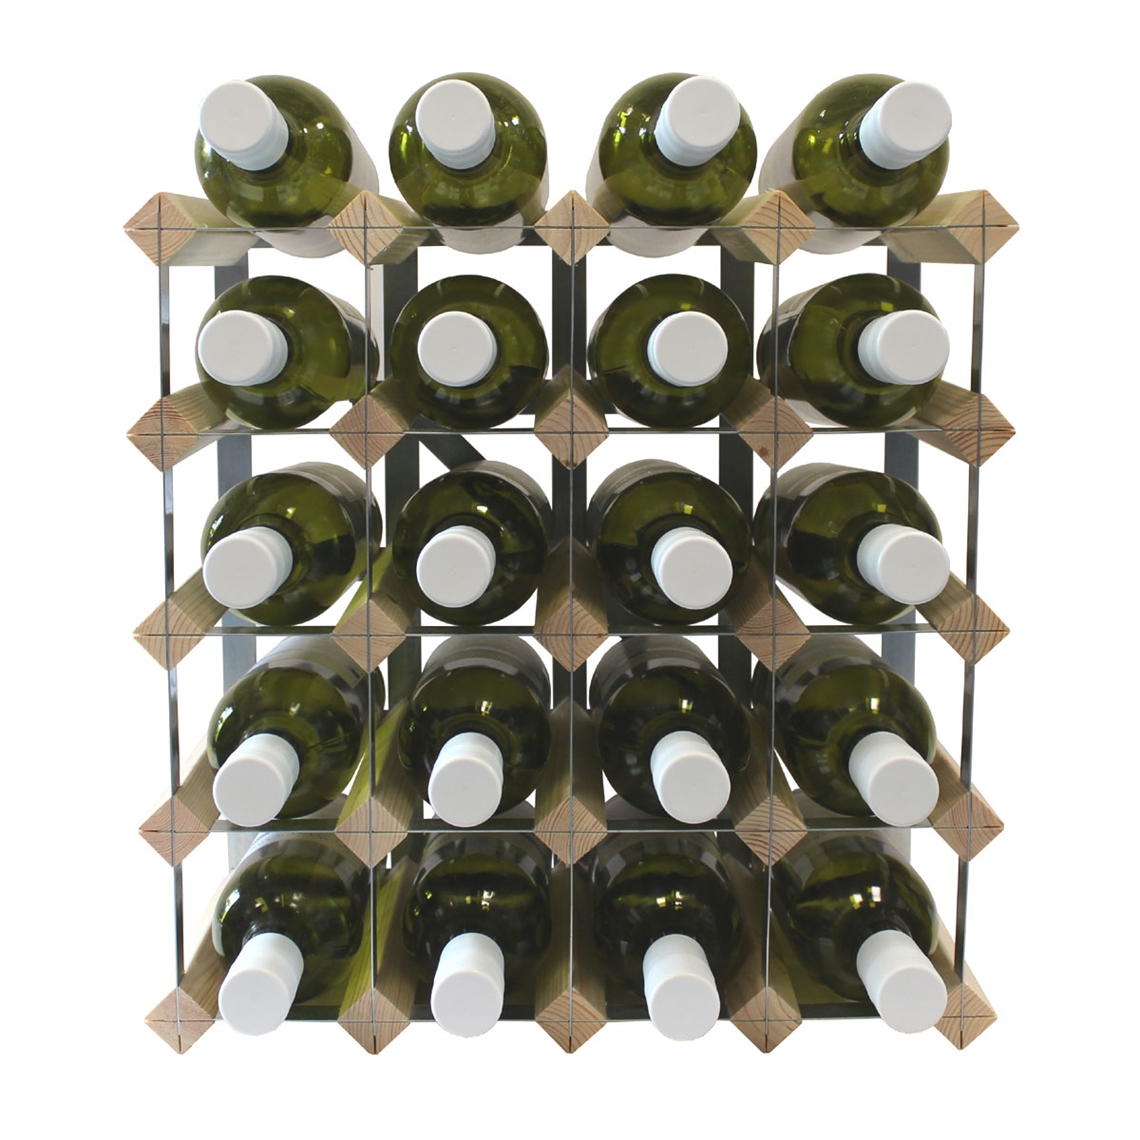 View more under stairs wine cellars from our Assembled Wine Racks range